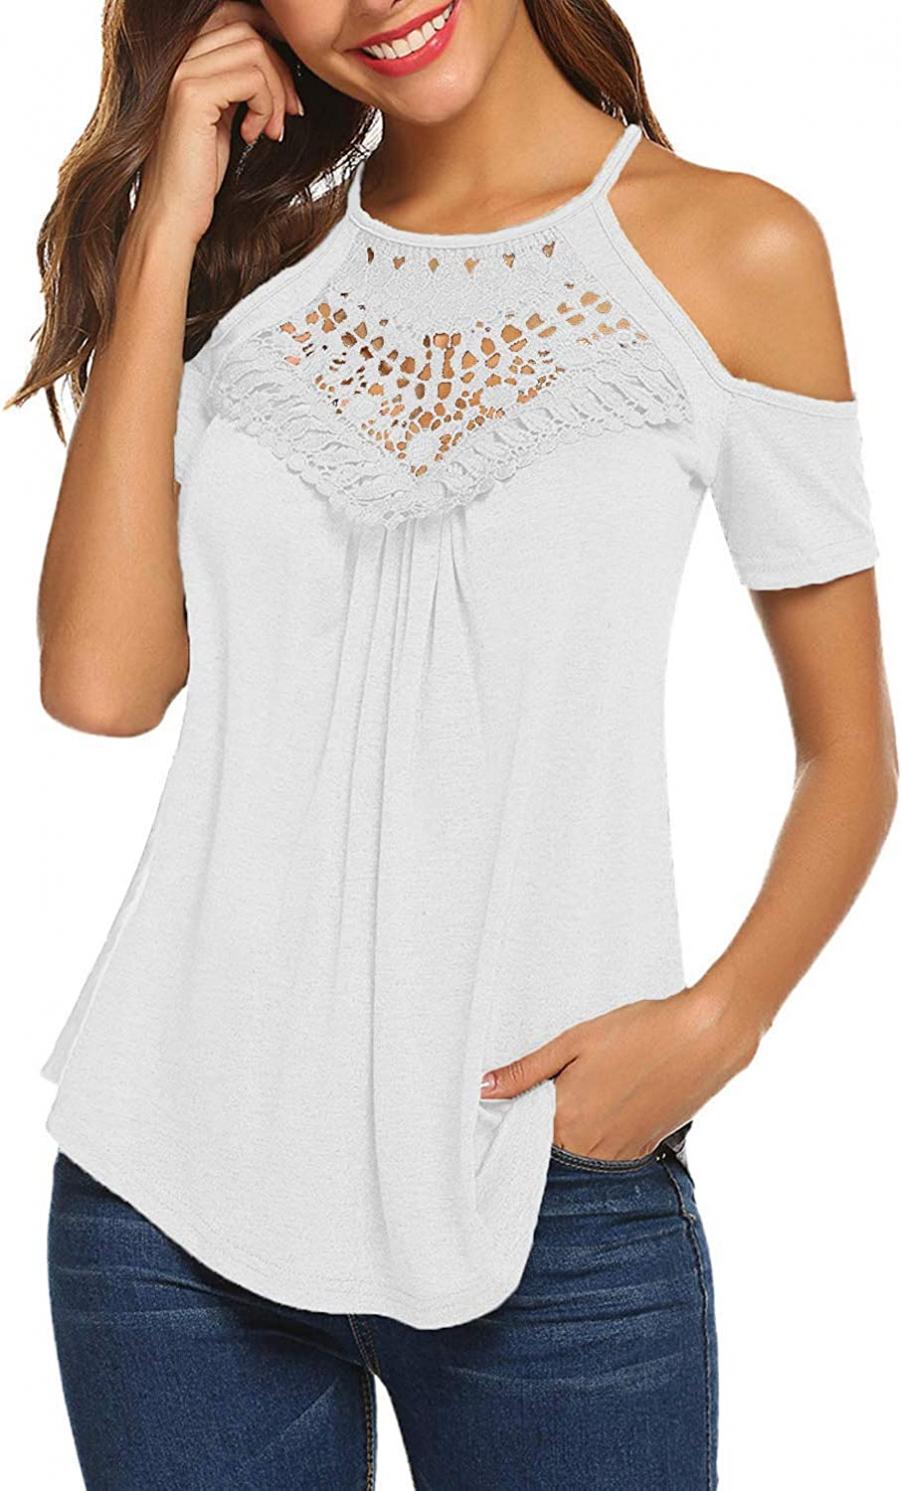 Bluetime Womens Summer Tops Halter Lace Short Sleeve Cold Shoulder Tops Casual Cute Shirts